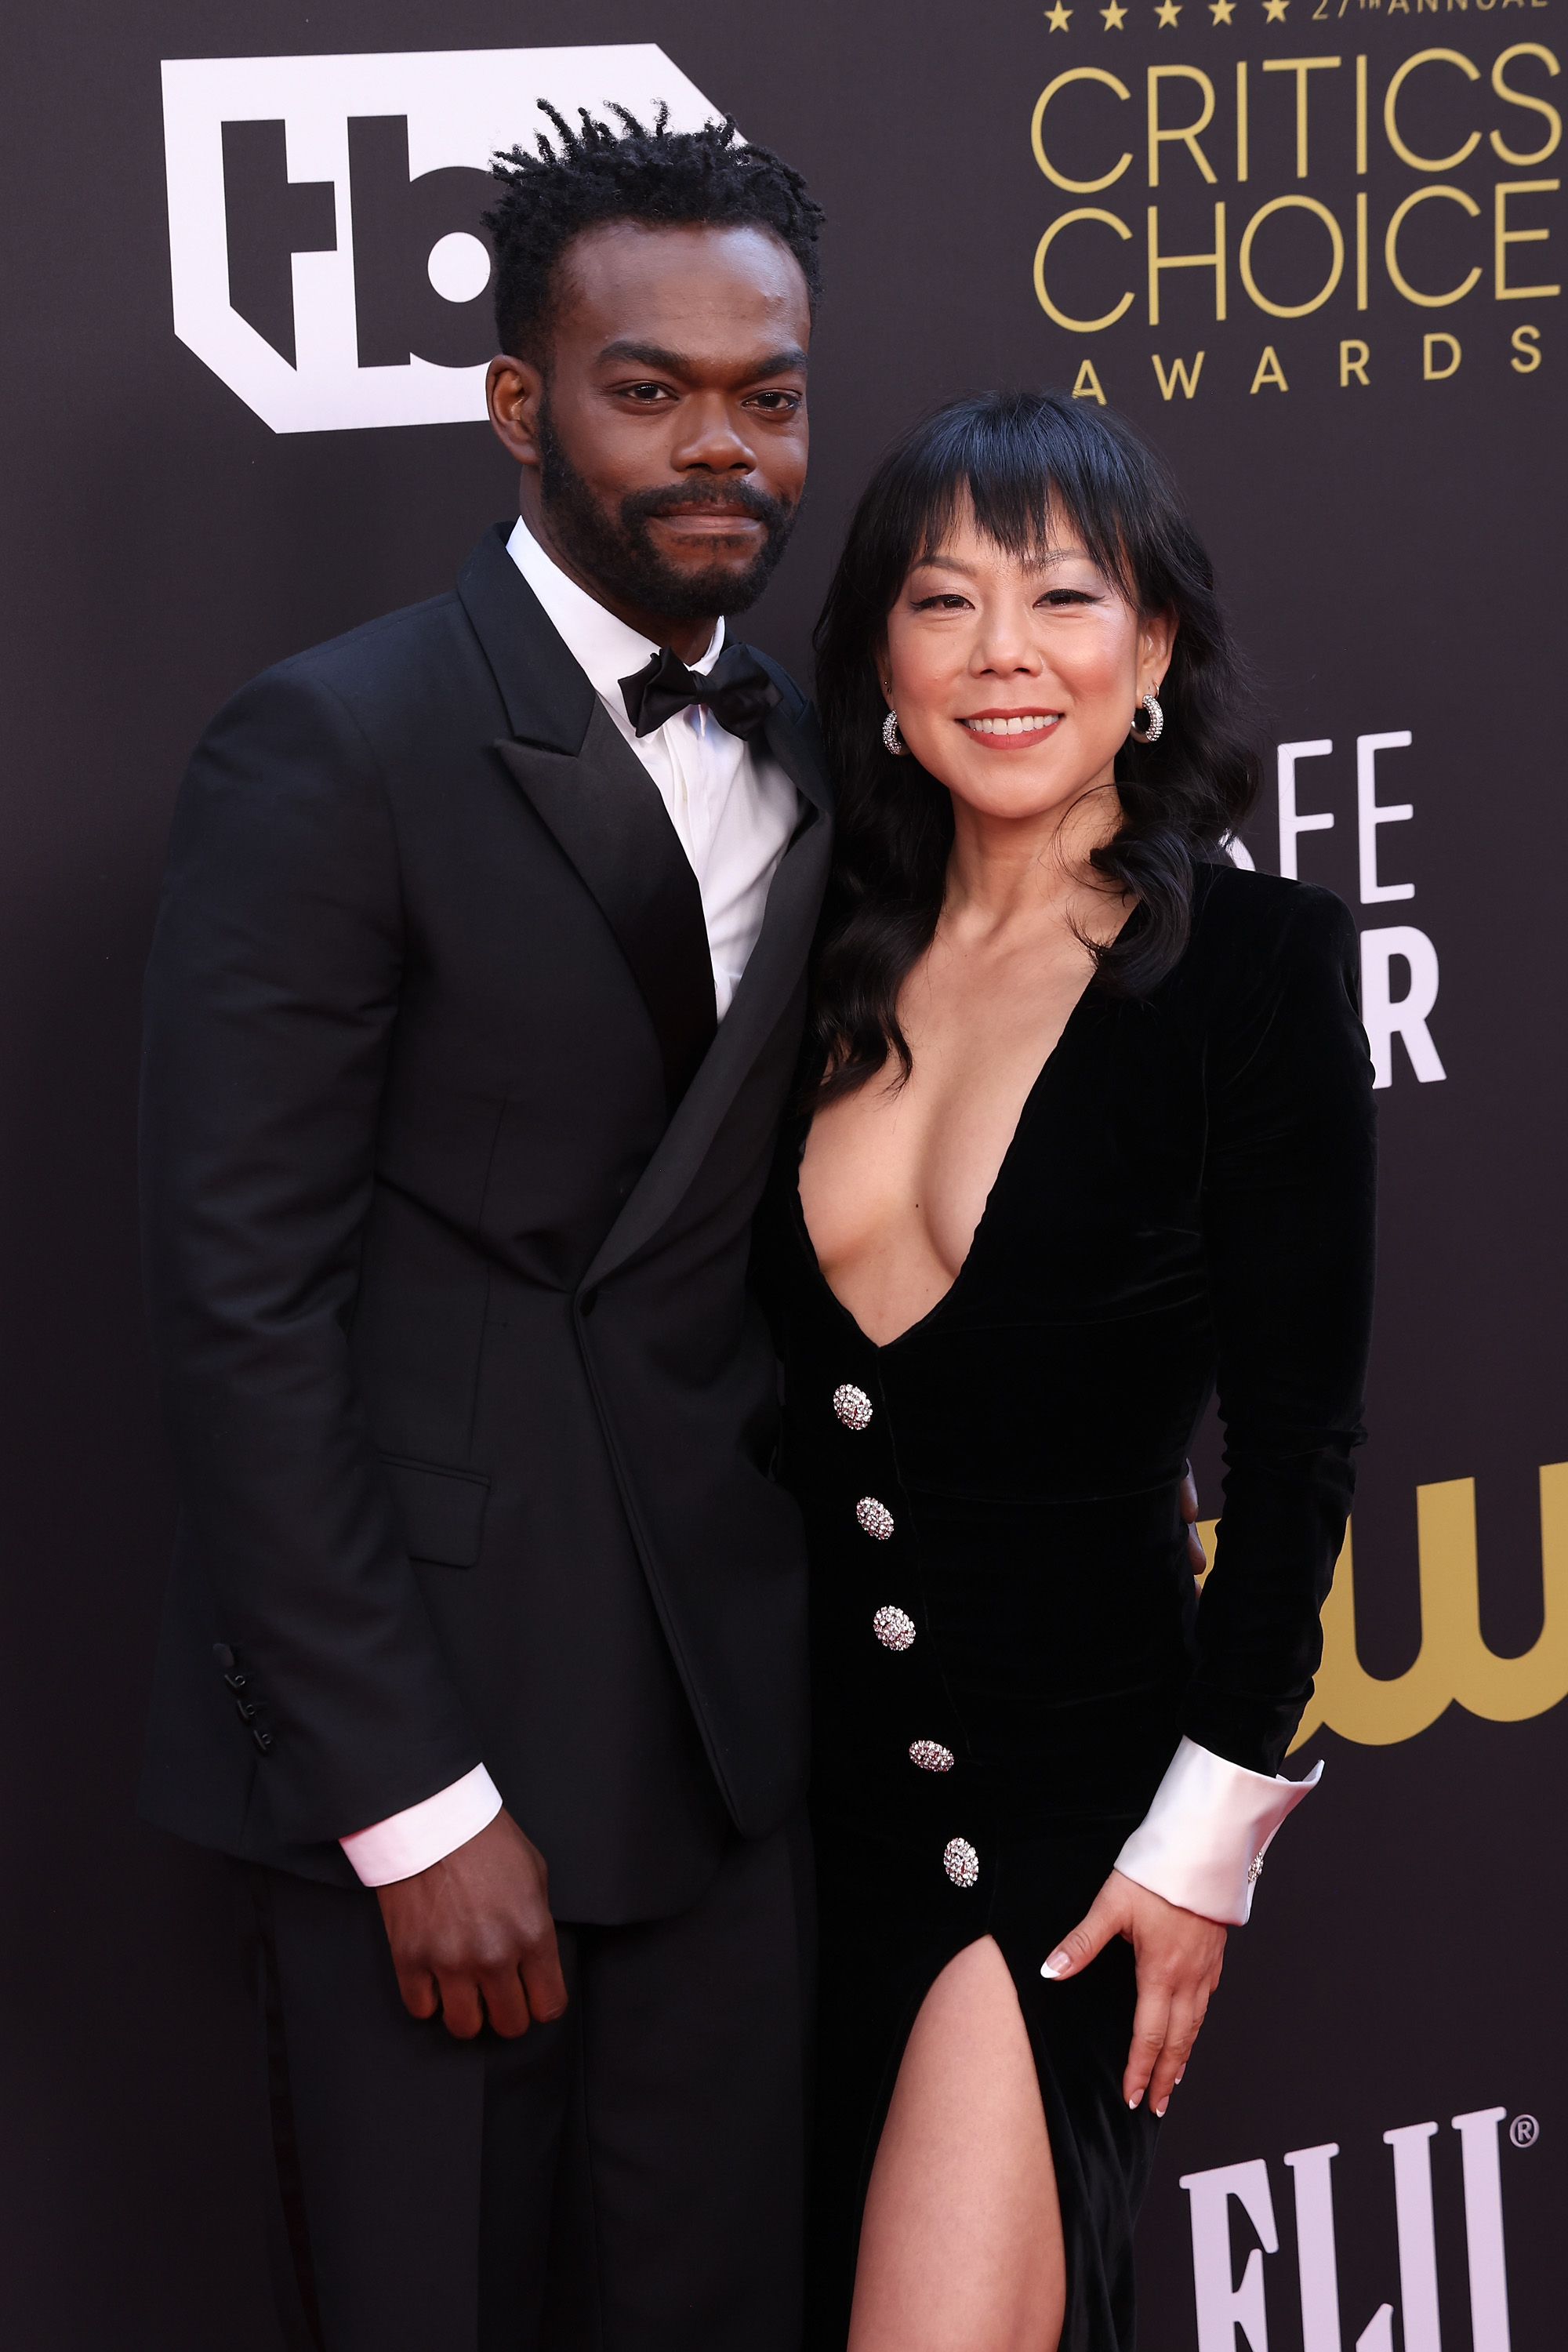 William Jackson Harper and Ali Ahn at the 27th Annual Critics Choice Awards on March 13, 2022, in Los Angeles, California. | Source: Getty Images